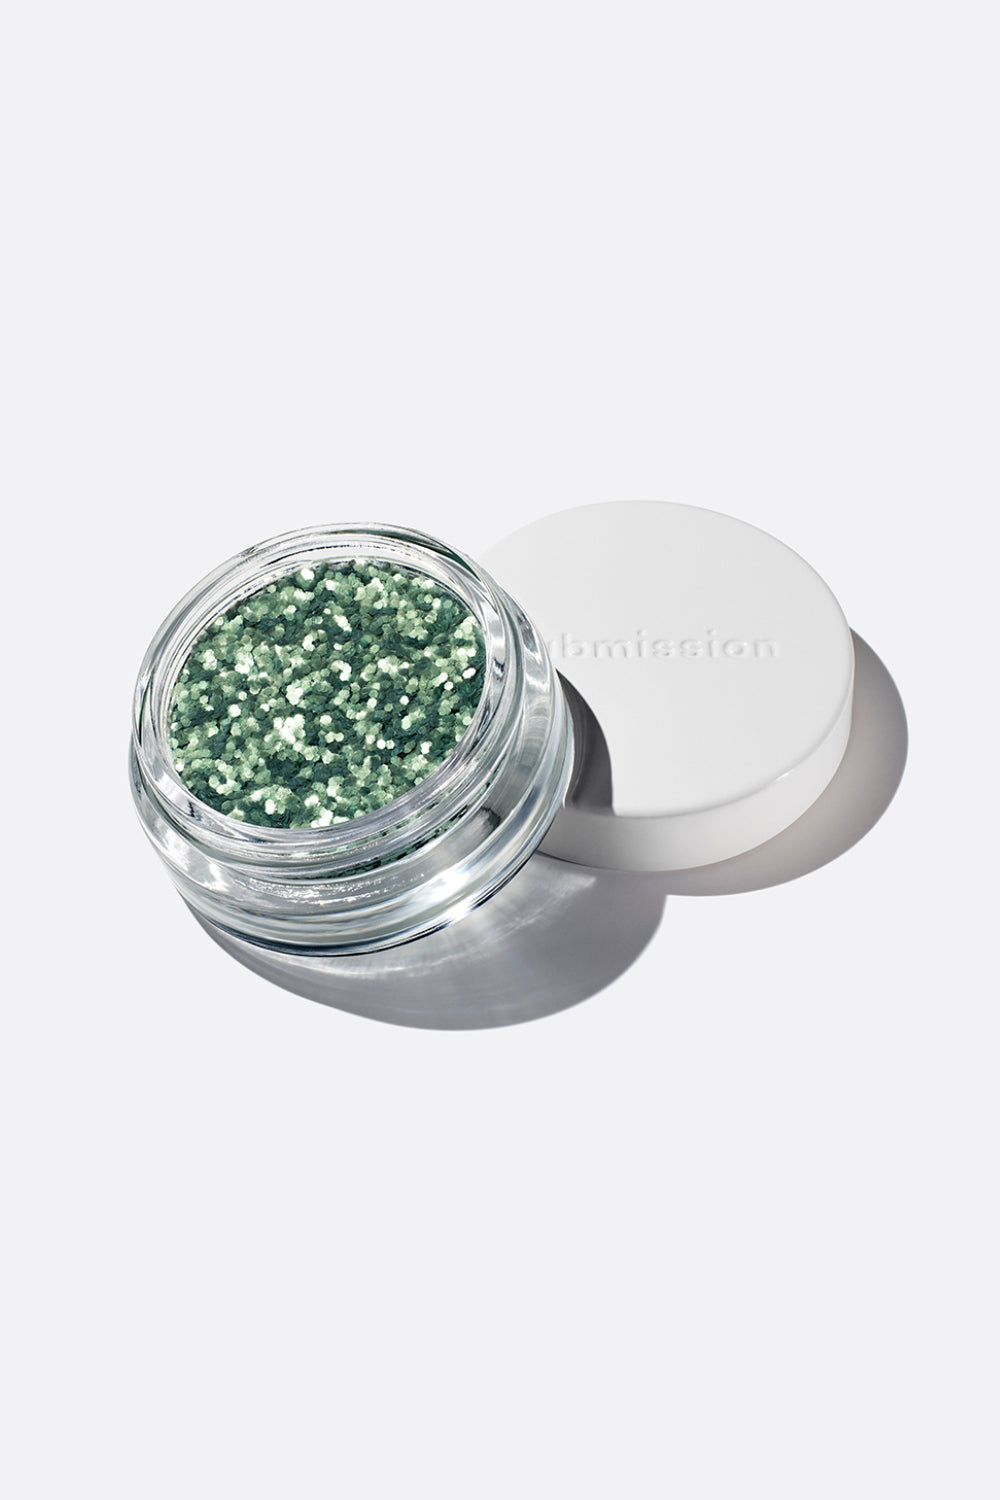 SUBMISSION BEAUTY GLITTER GREEN